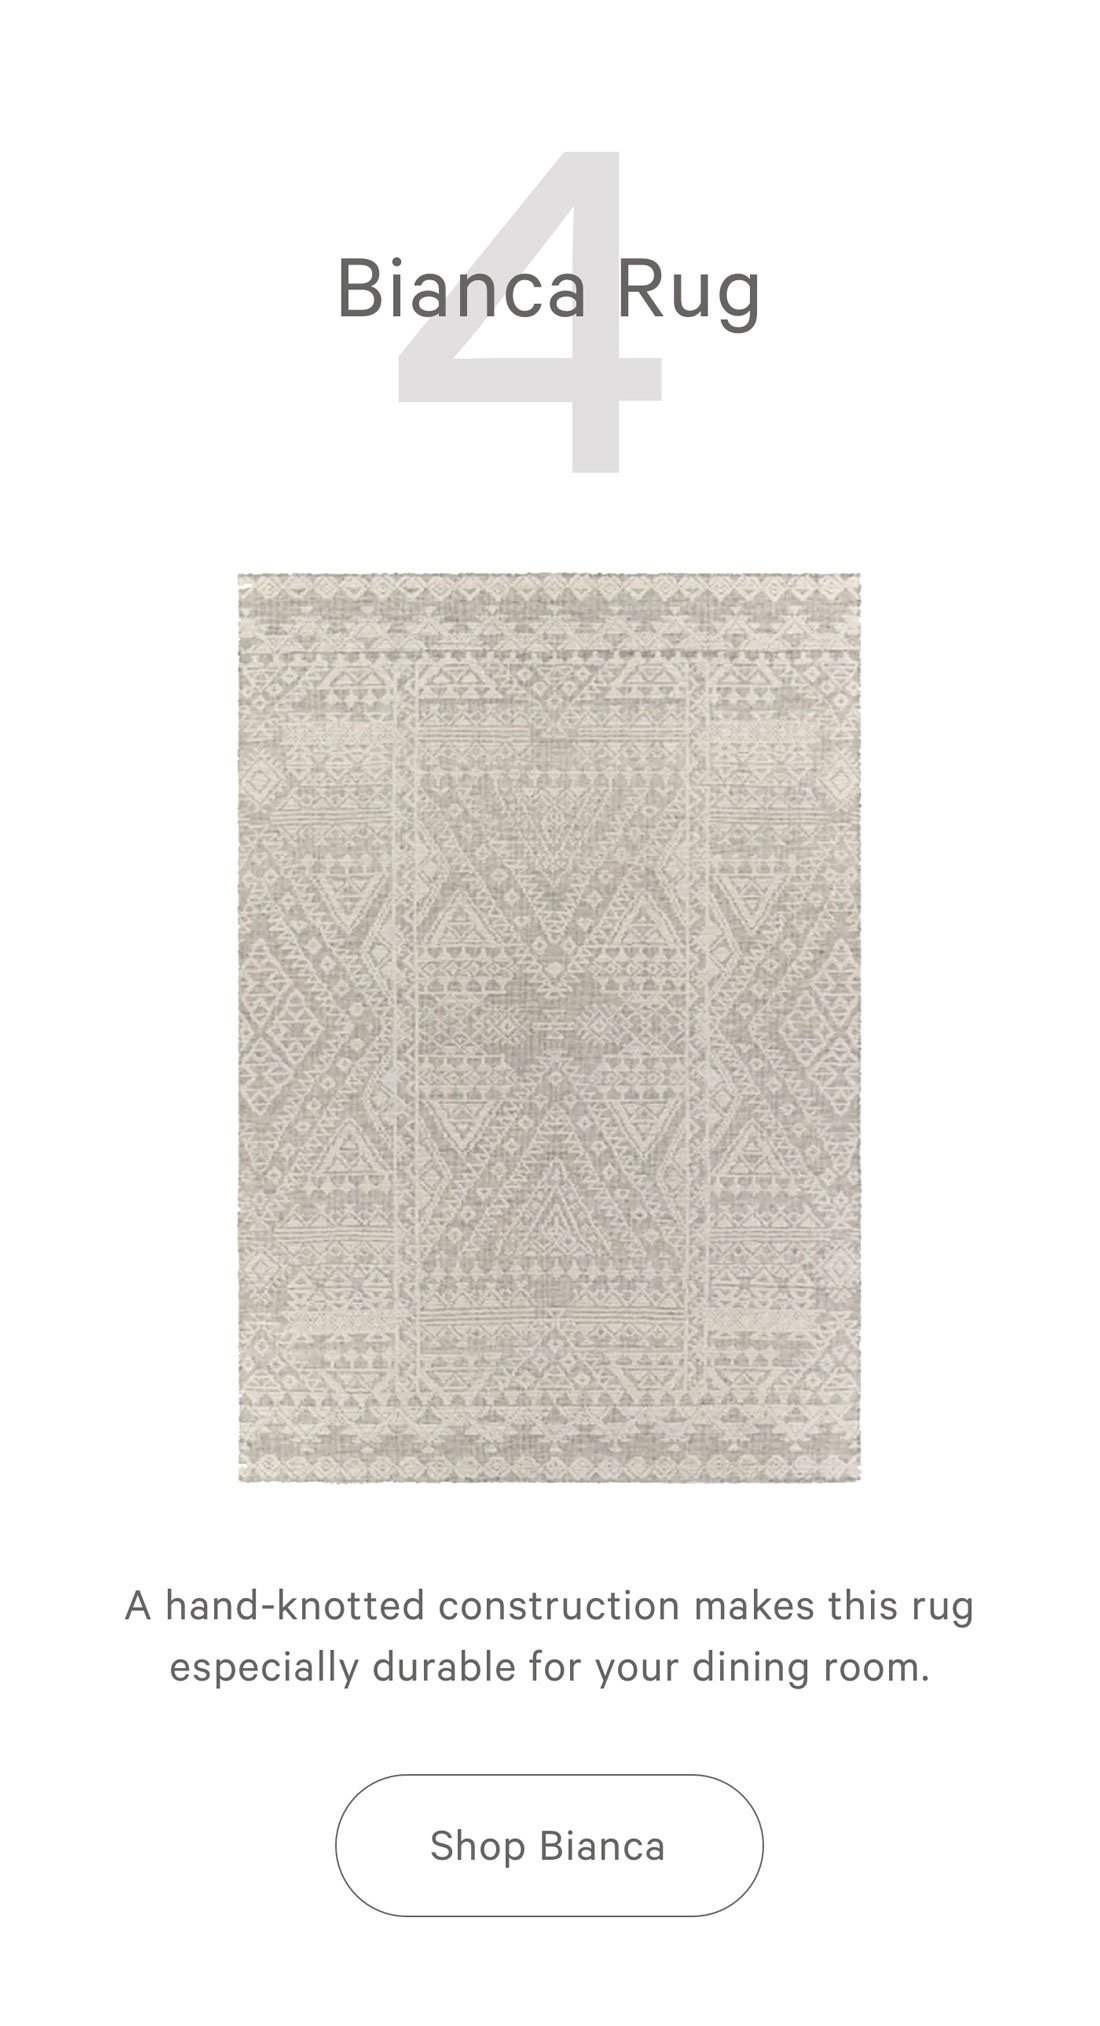 4 Bianca Rug A hand-knotted construction makes this rug especially durable for your dining room.